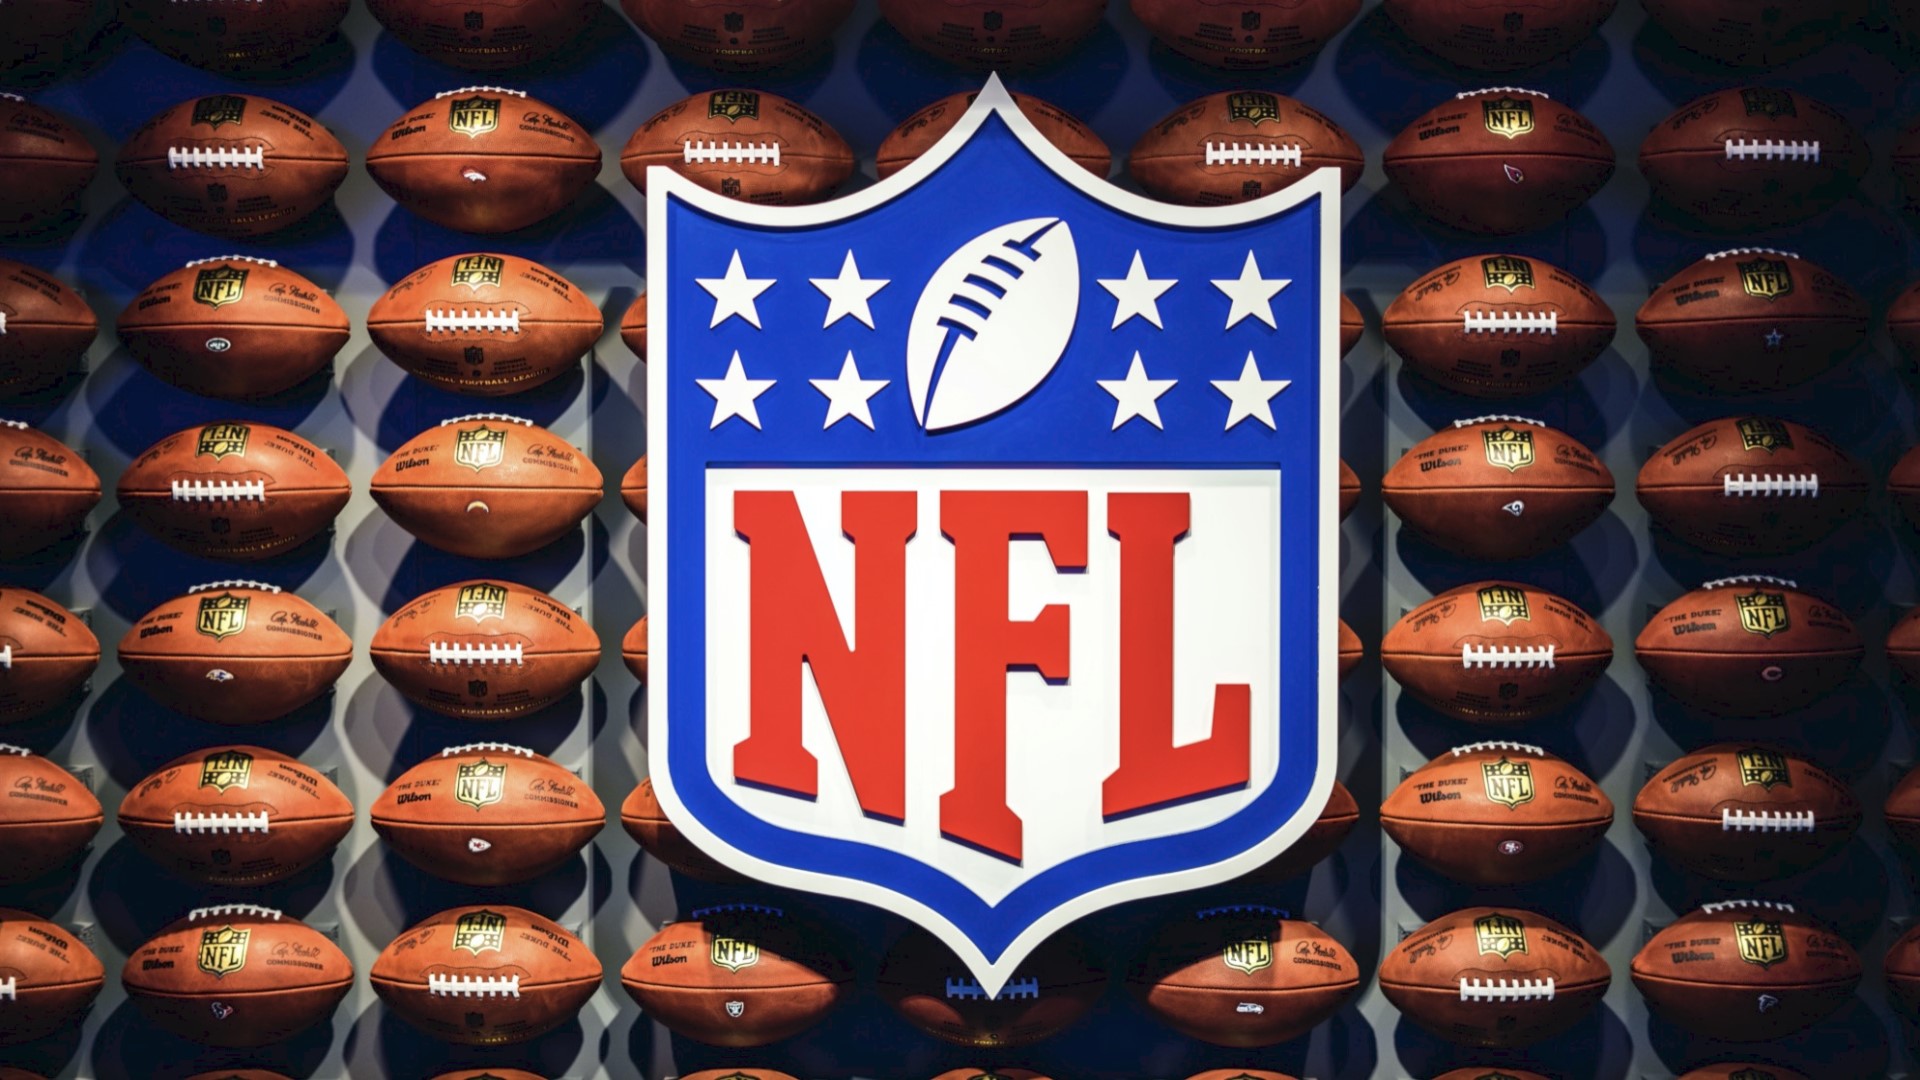 While the pandemic has disrupted winter sports and pushed back spring and summer games, the NFL says it plans to kick off its season in September. Veuer's Justin Kircher has more.